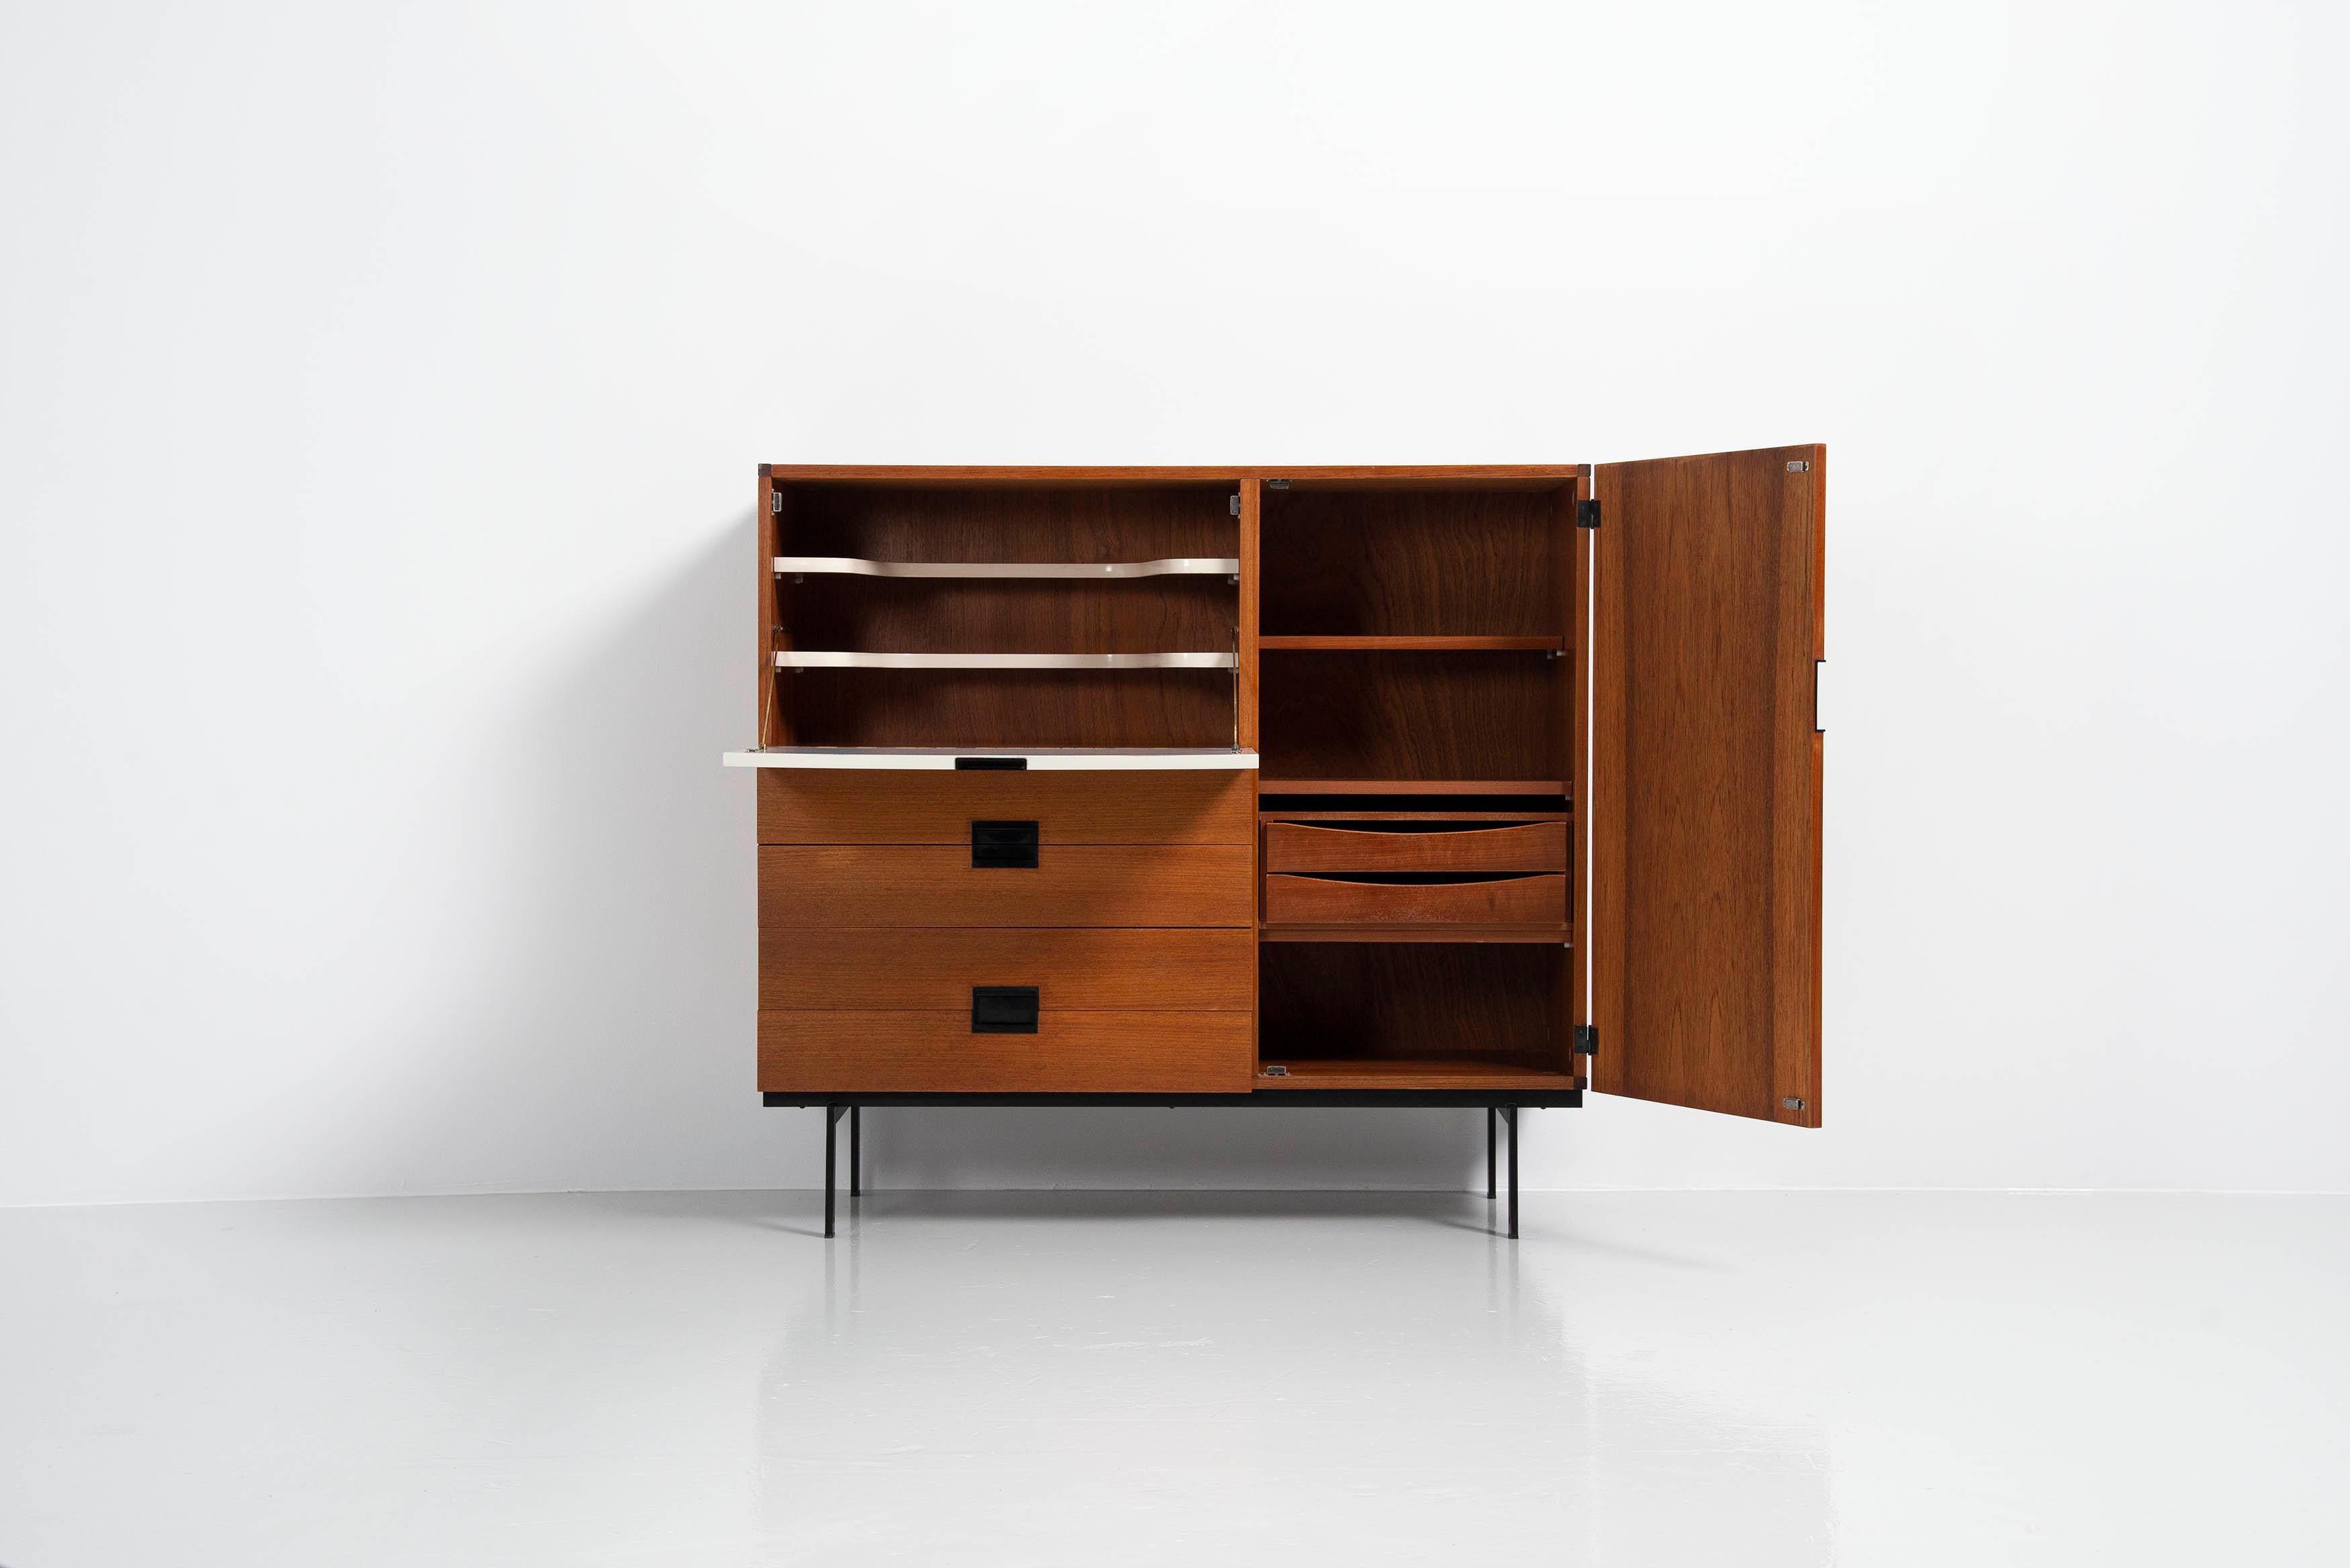 Very nice minimalist teak wooden cabinet model CU01 designed by Cees Braakman and manufactured by Pastoe UMS, Holland 1958. This is for model CU01 and has a drop down door on the left which is white painted and has 2 shelves behind for glasses and